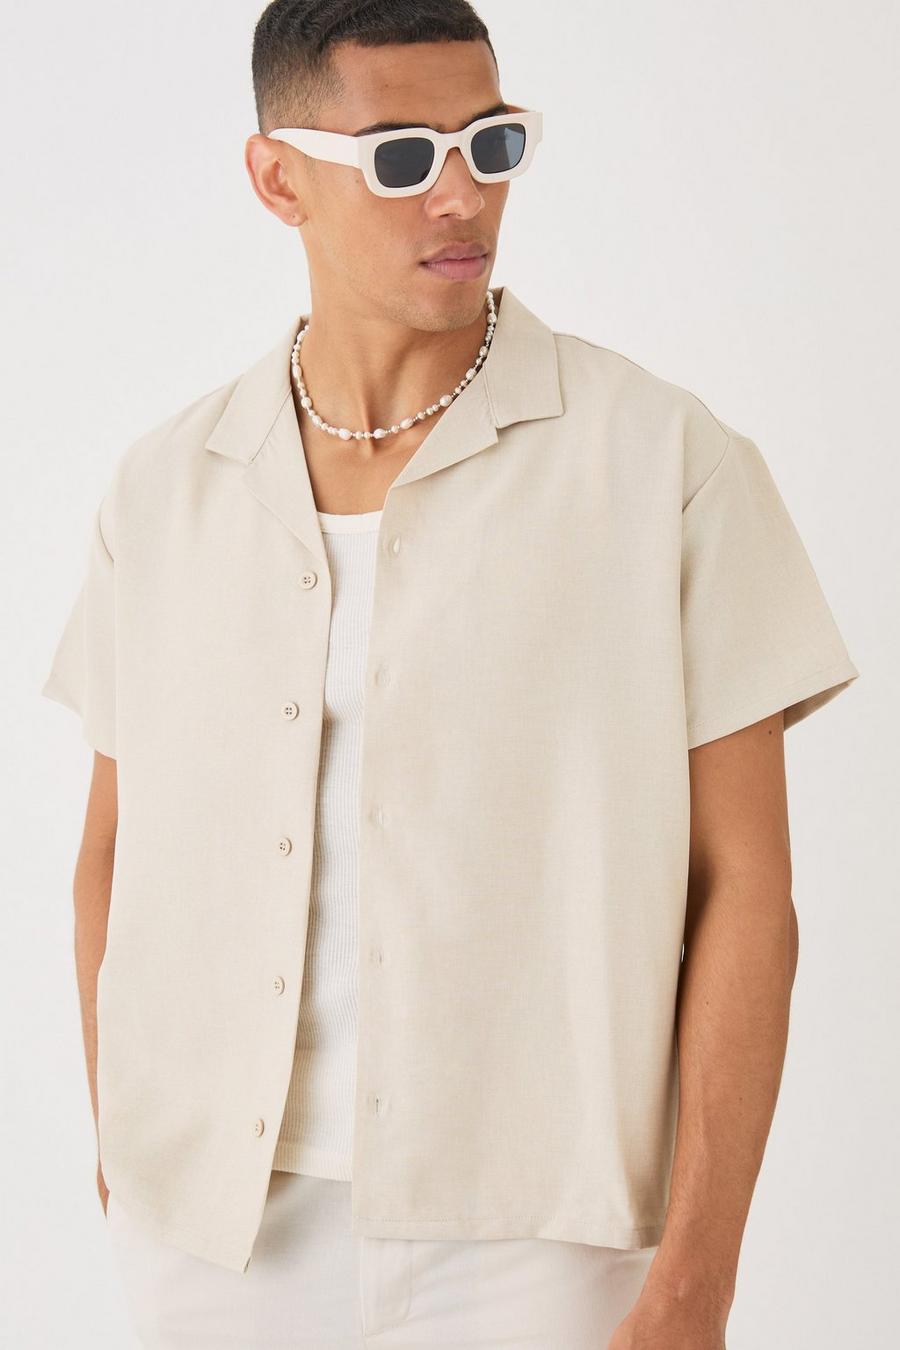 Mens Going Out Outfits | boohoo UK